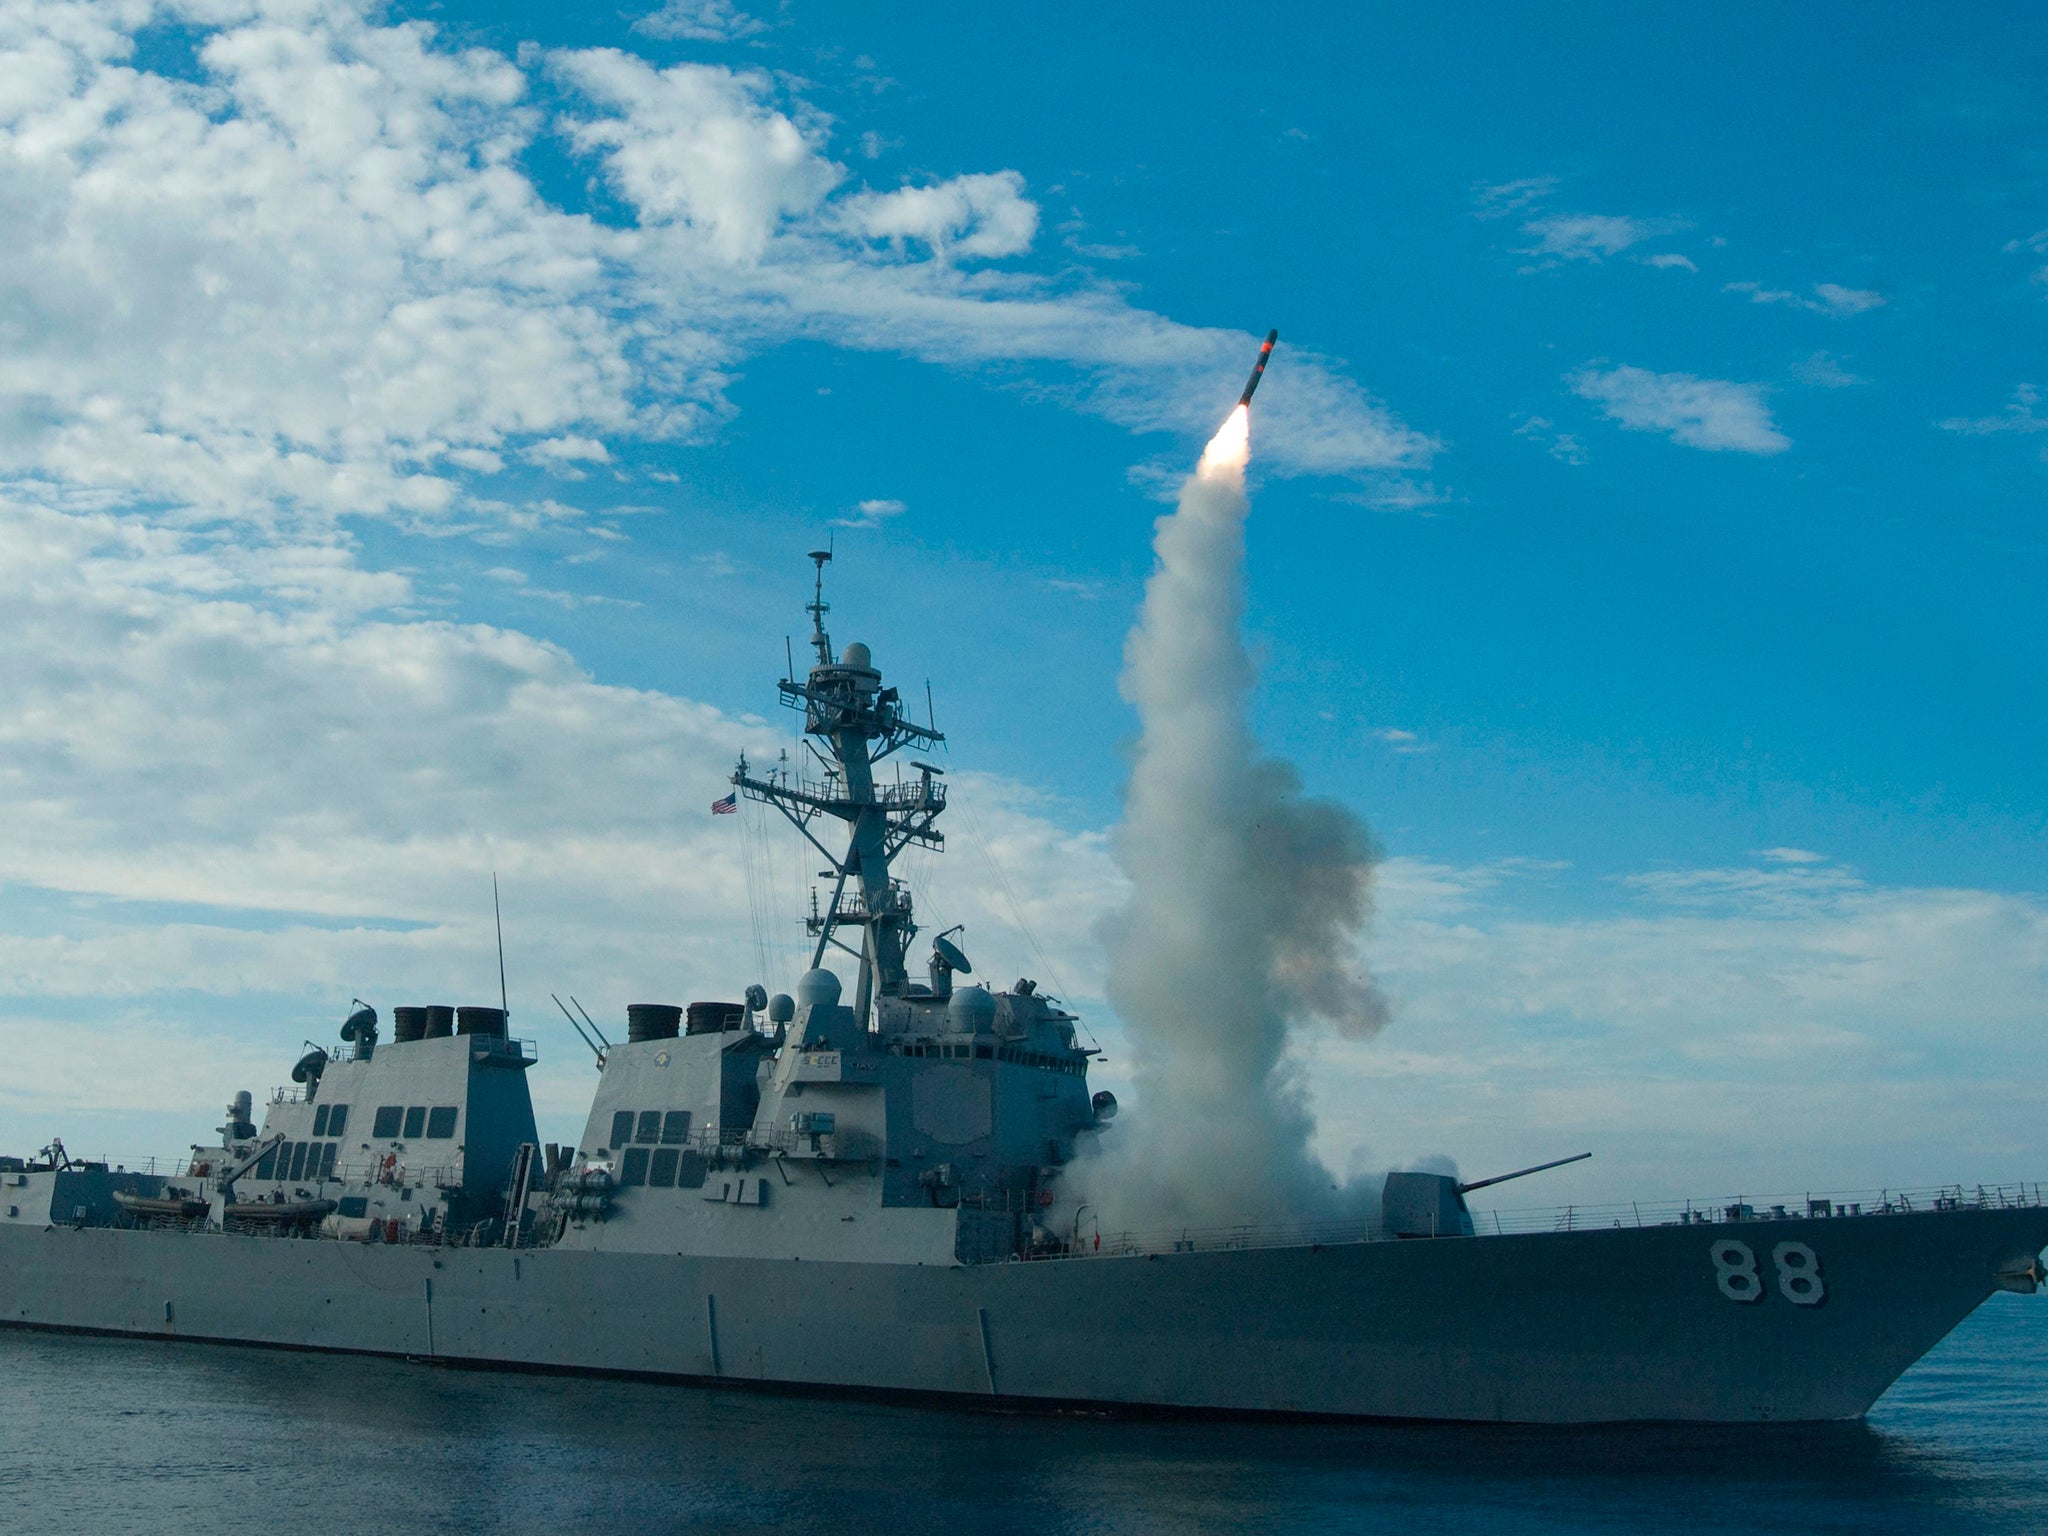 A Tomahawk missile is shot from a US destroyer. An American Navy ship was forced to fire warning shots at an Iranian ship in the Persian Gulf recently